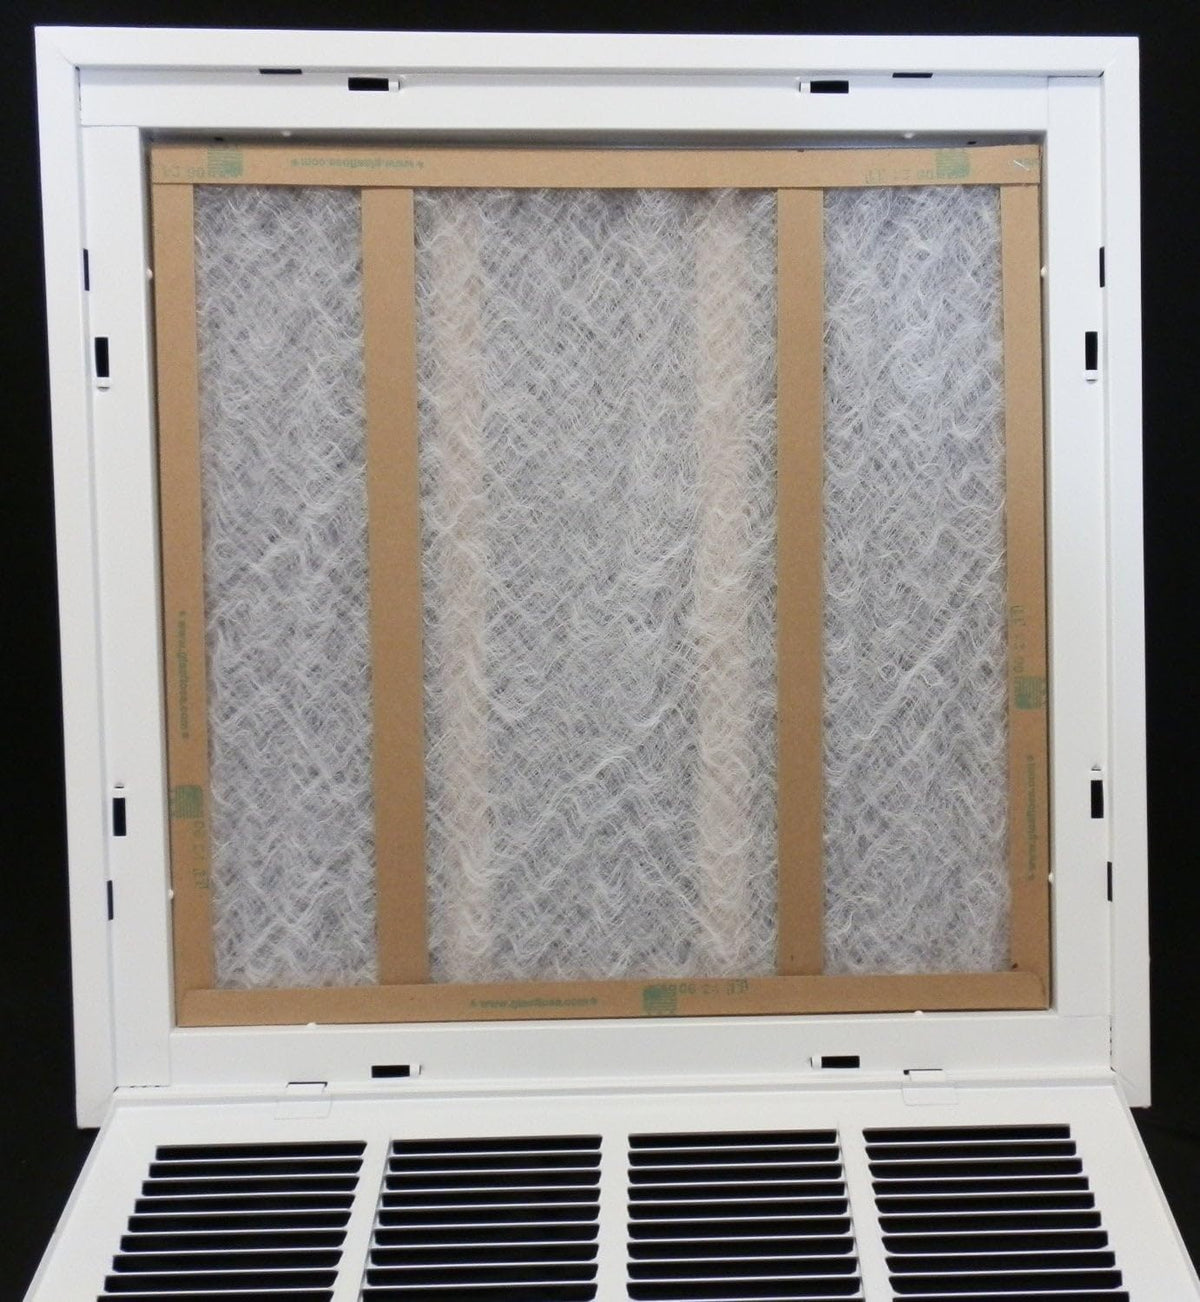 18&quot; X 26&quot; Steel Return Air Filter Grille for 1&quot; Filter - Removable Frame - [Outer Dimensions: 20 5/8&quot; X 28 5/8&quot;]